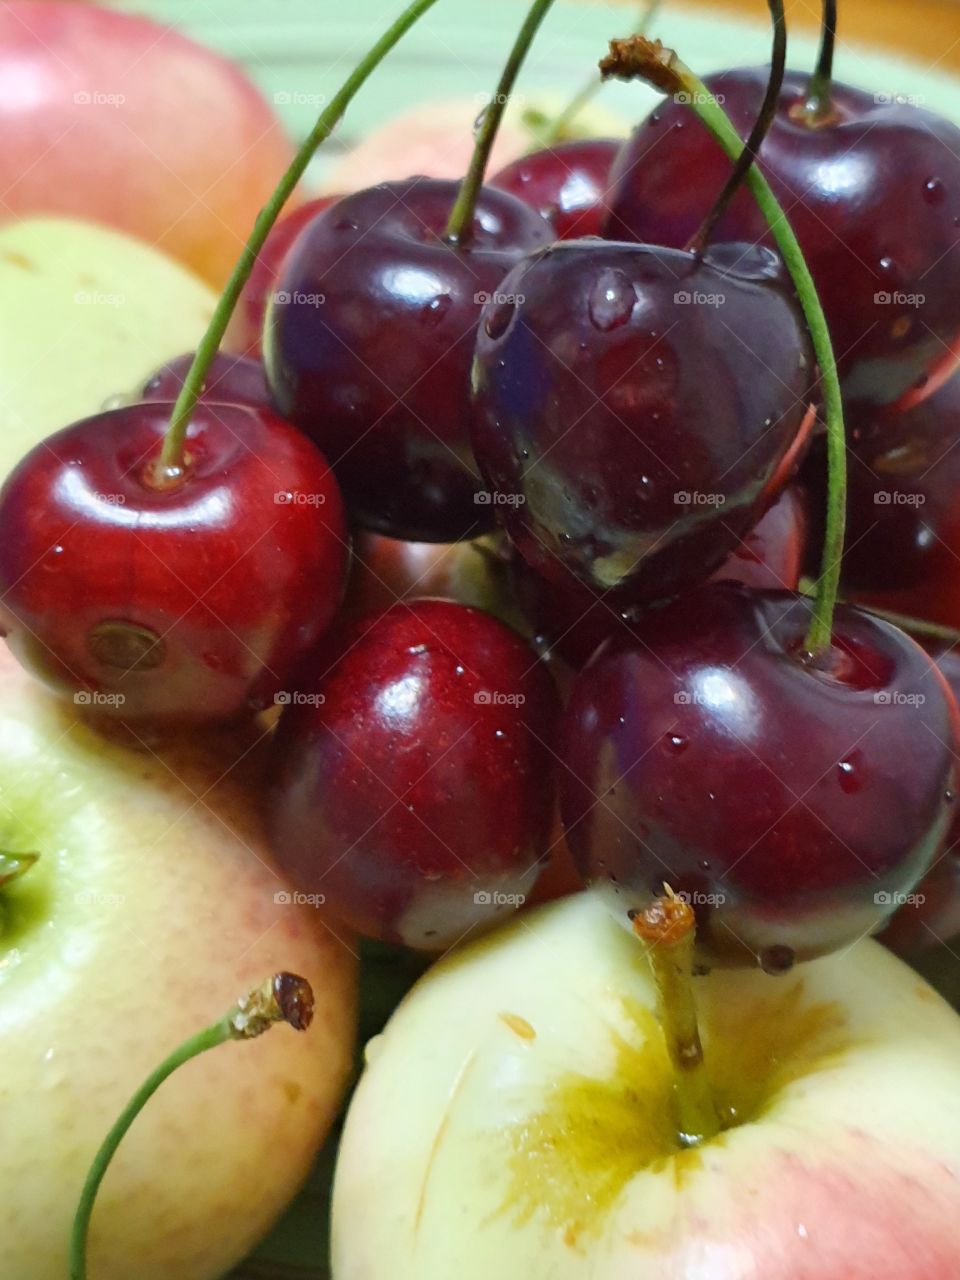 juicy and yummy apples and cherries closeup